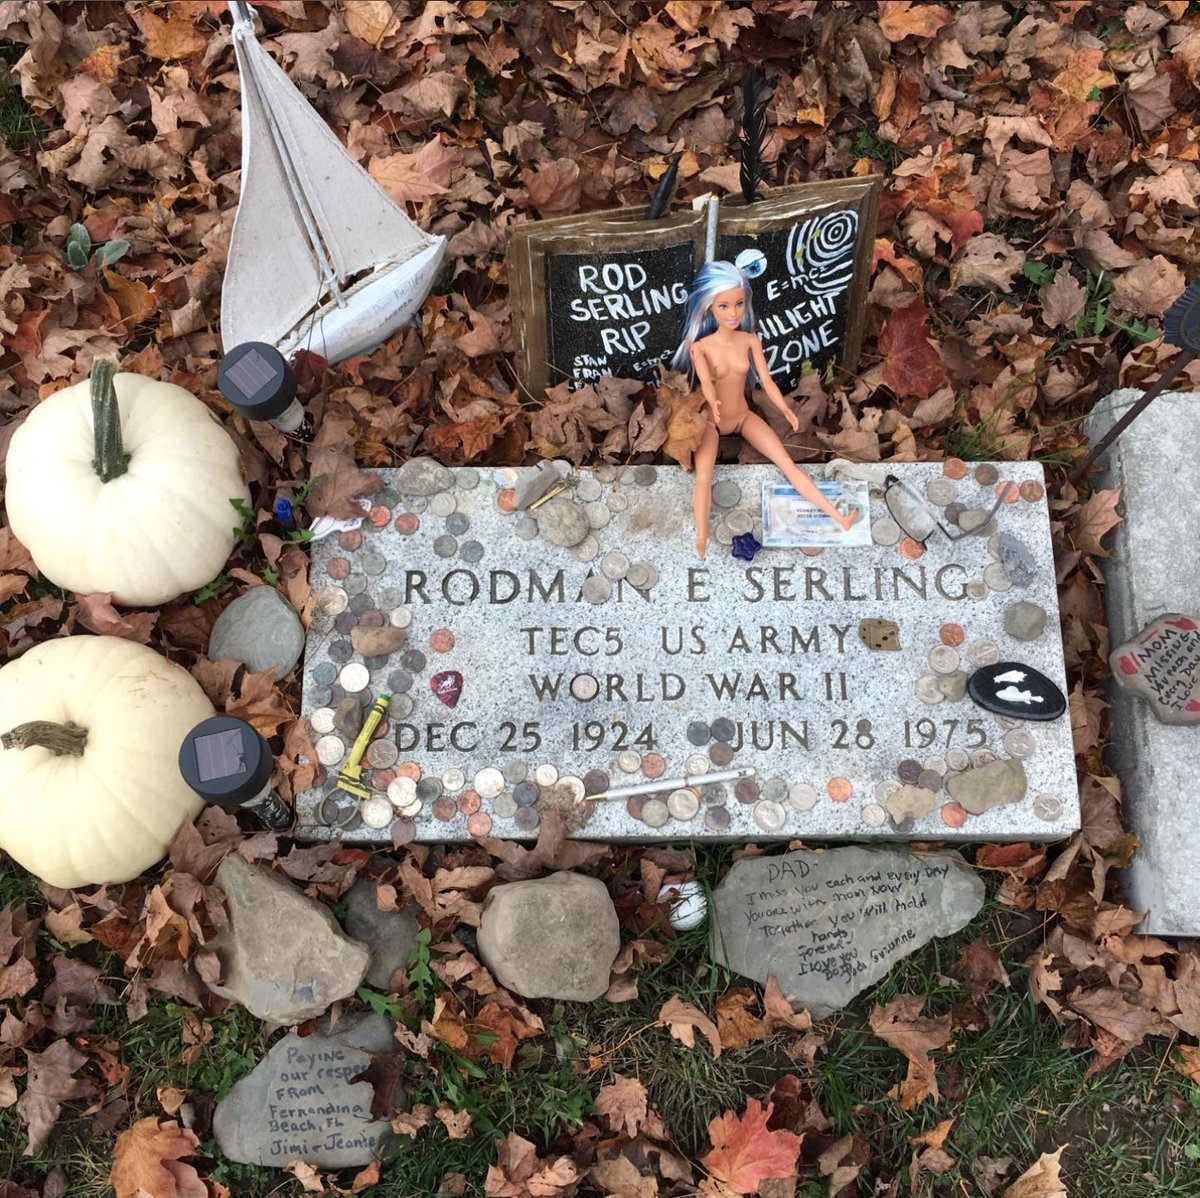 If it wasn’t for the little gifts, it would just be one of thousands of tiny headstones in a quiet cemetery off of a little country road. We are fireflys; this guys light was a bright one. #rodserling #twilightzone